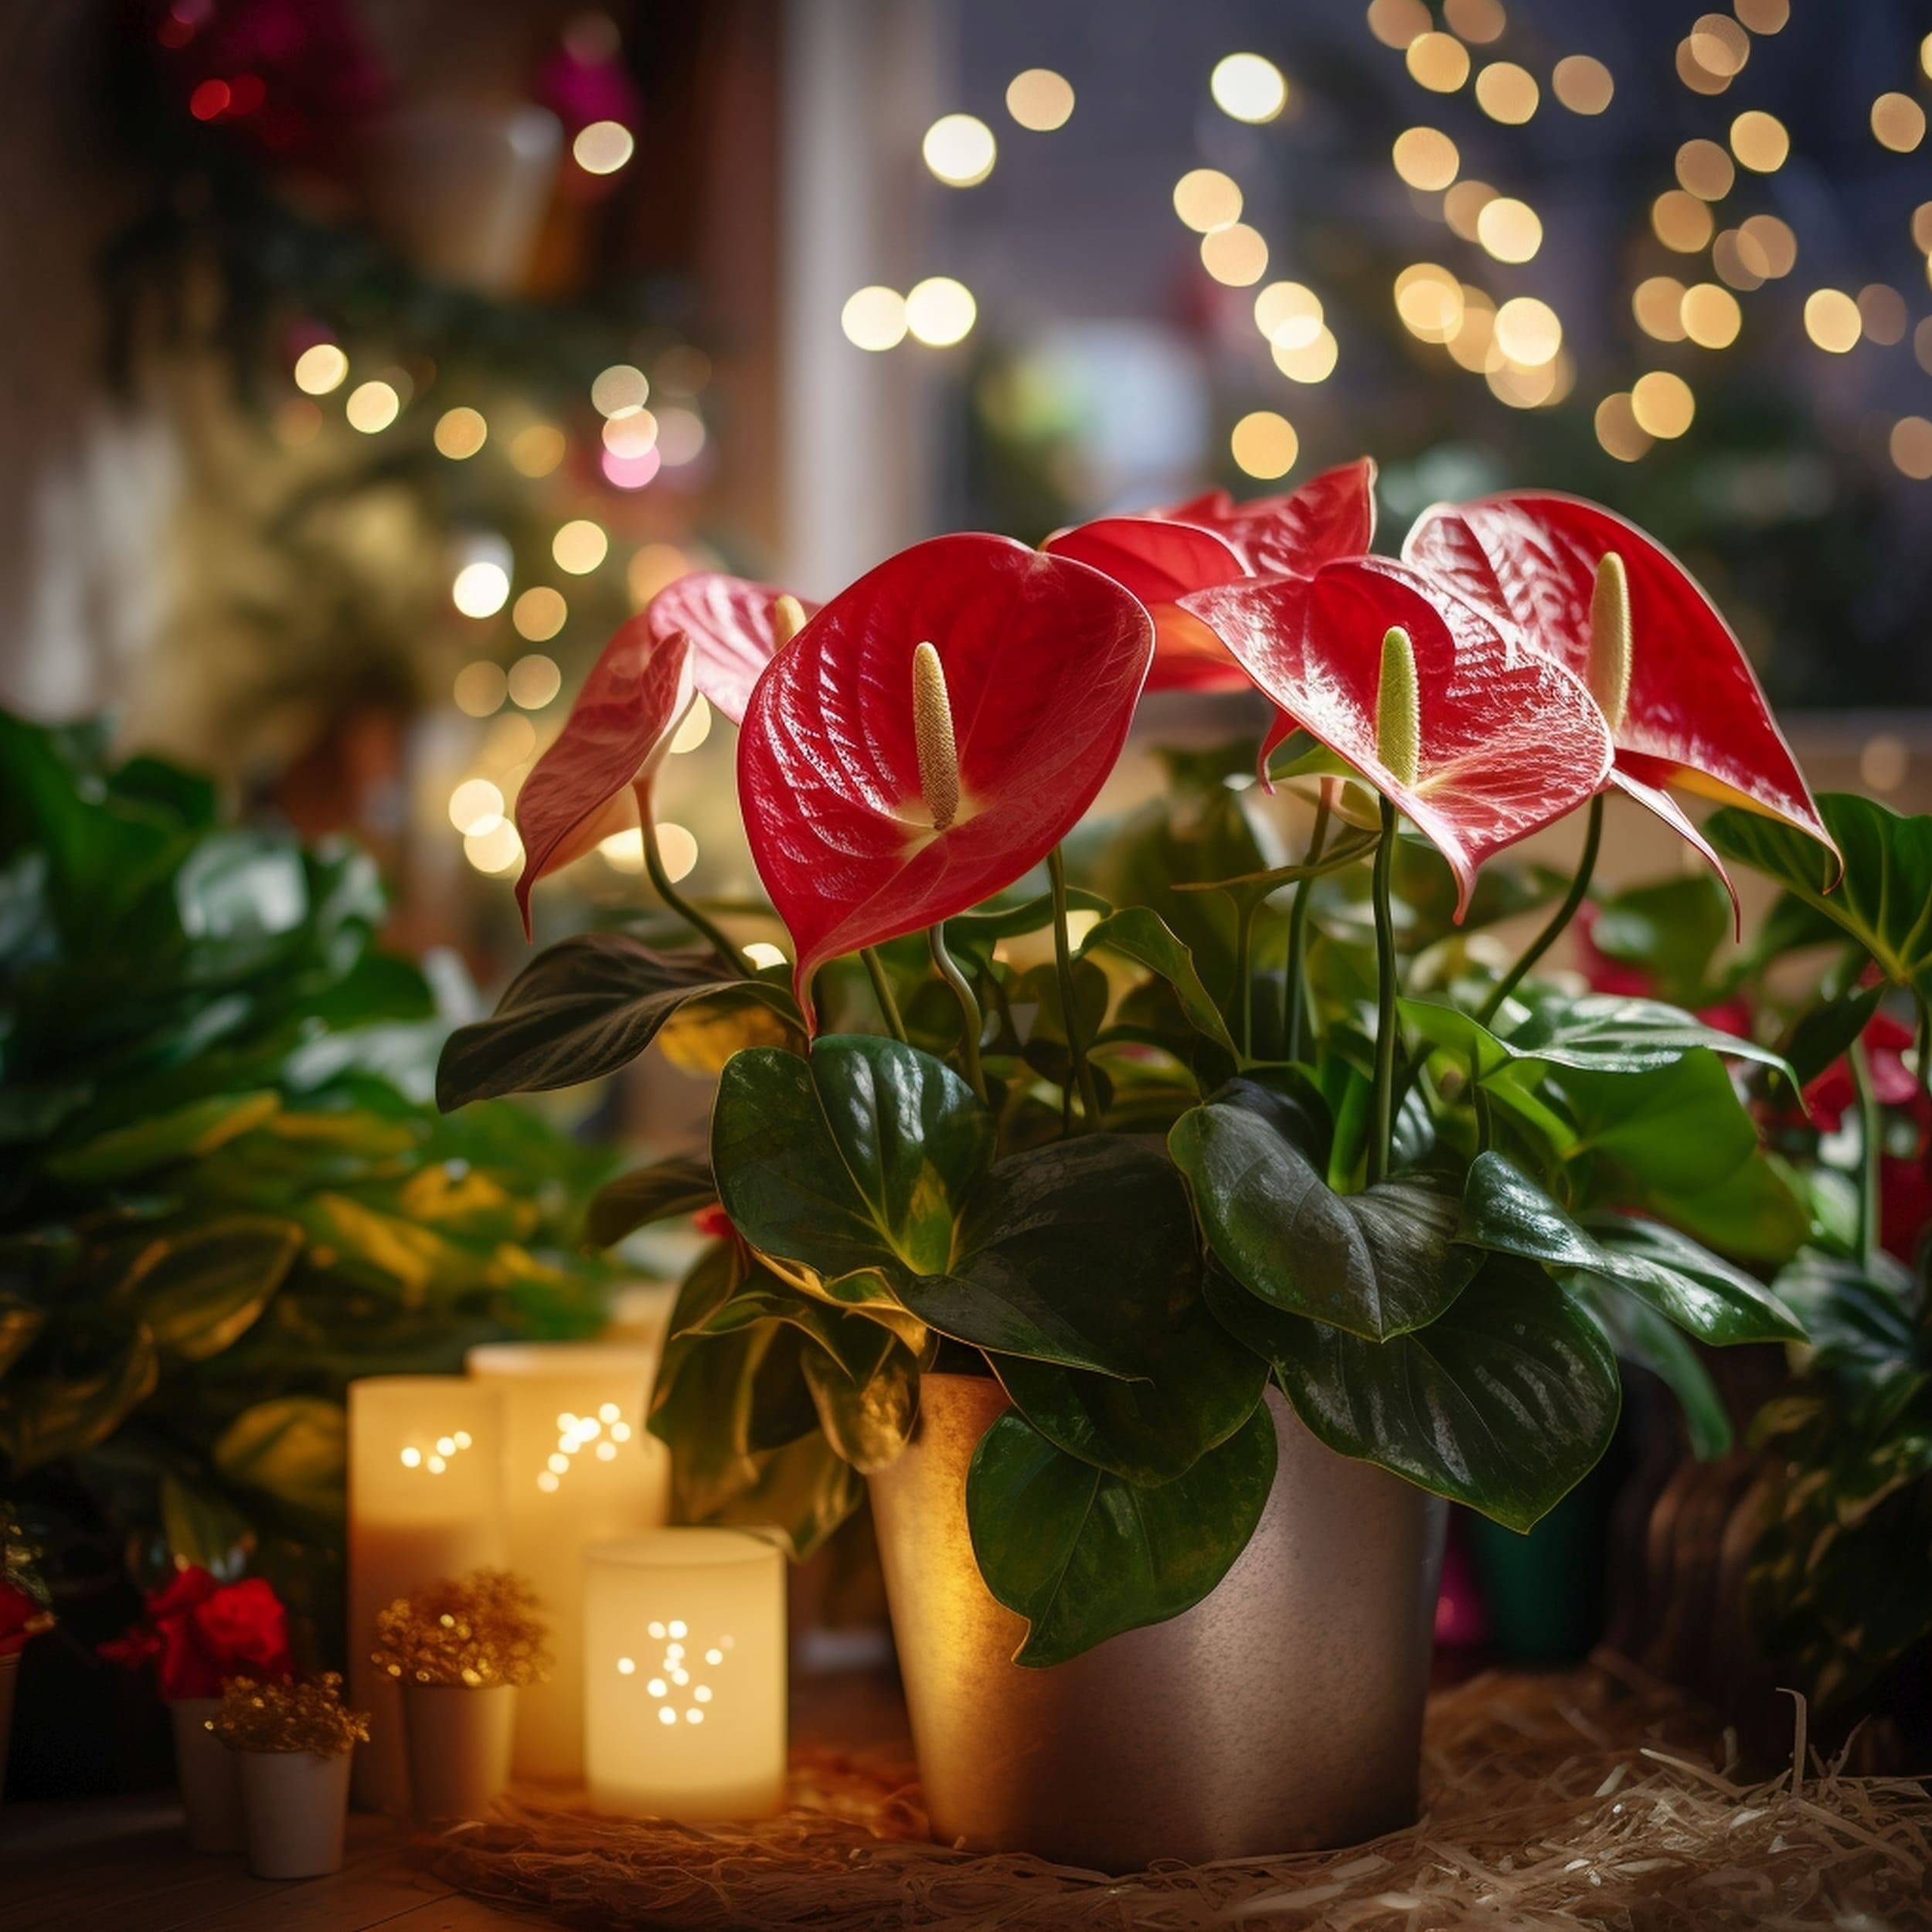 Anthurium Plant in a Pot Surrounded by Christmas Decorations